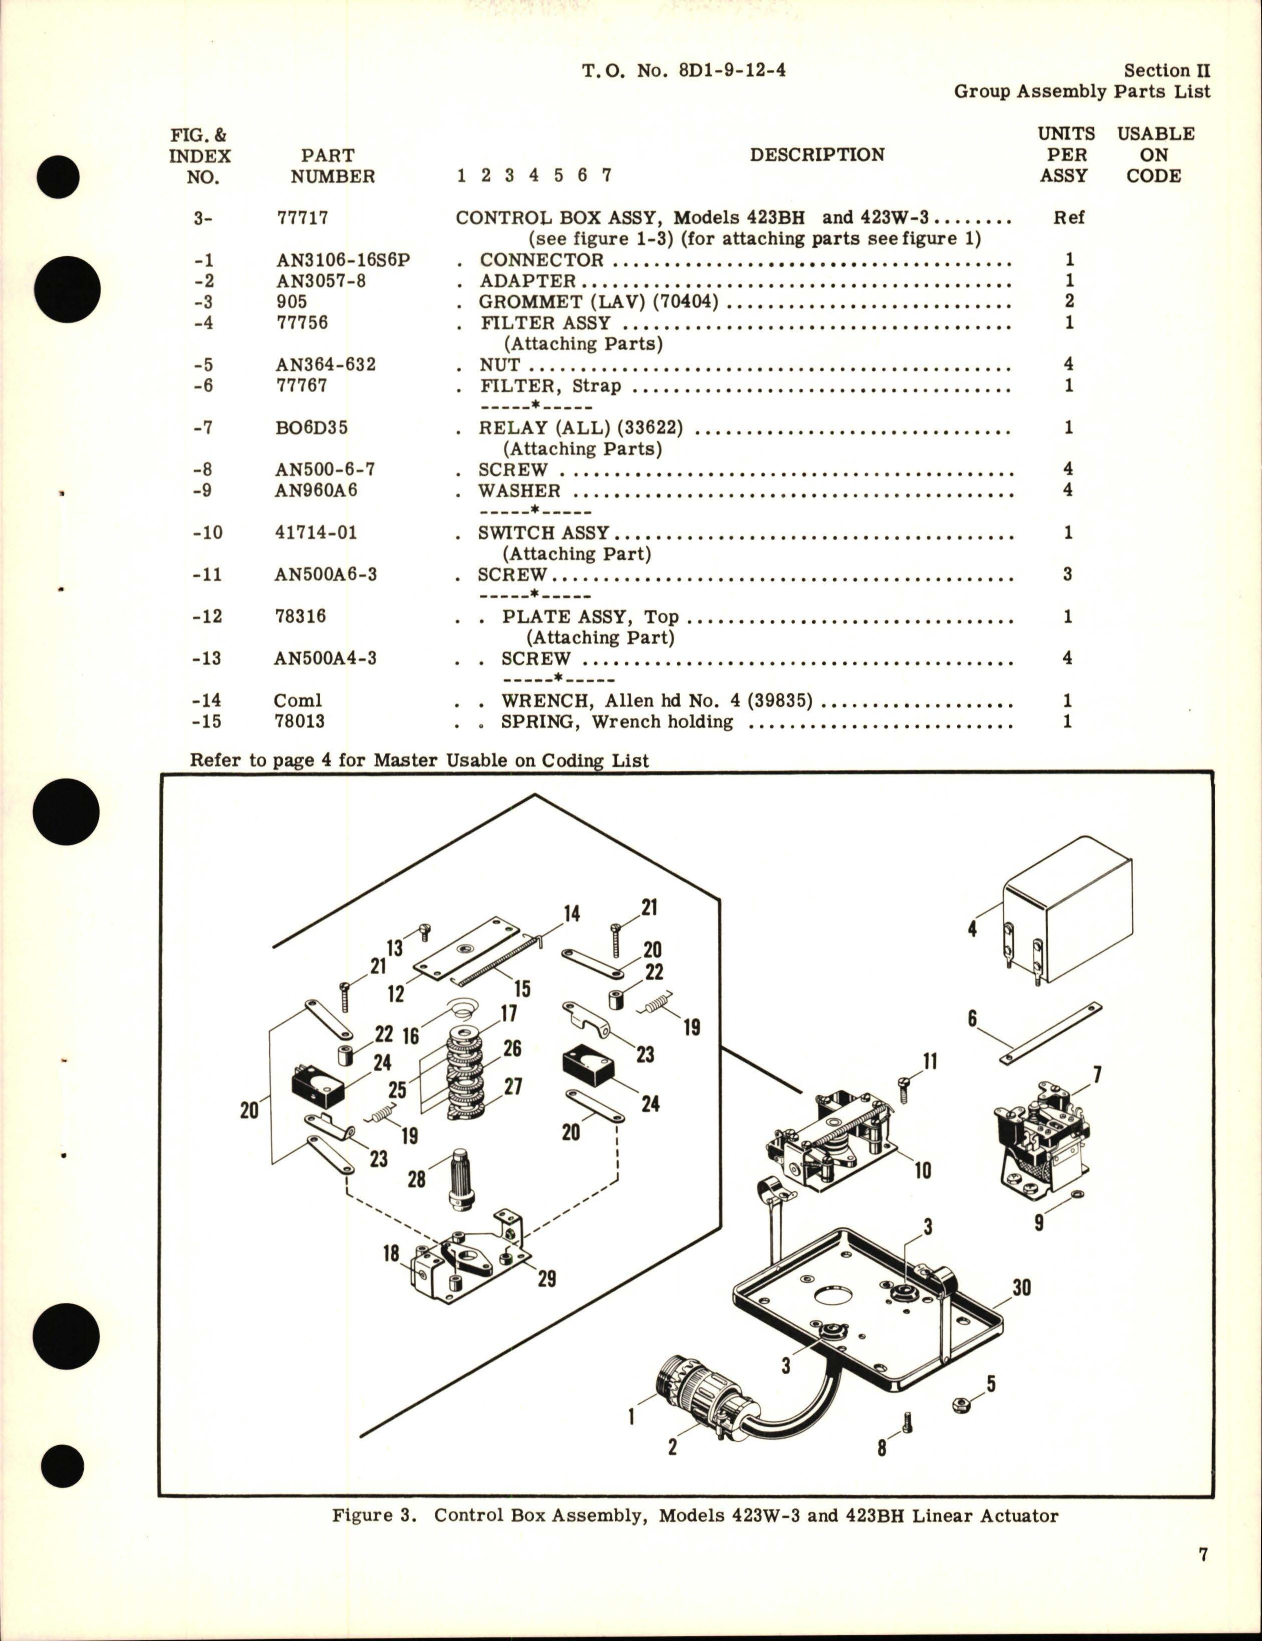 Sample page 9 from AirCorps Library document: Illustrated Parts Breakdown for Linear Actuator Assembly 423 Series